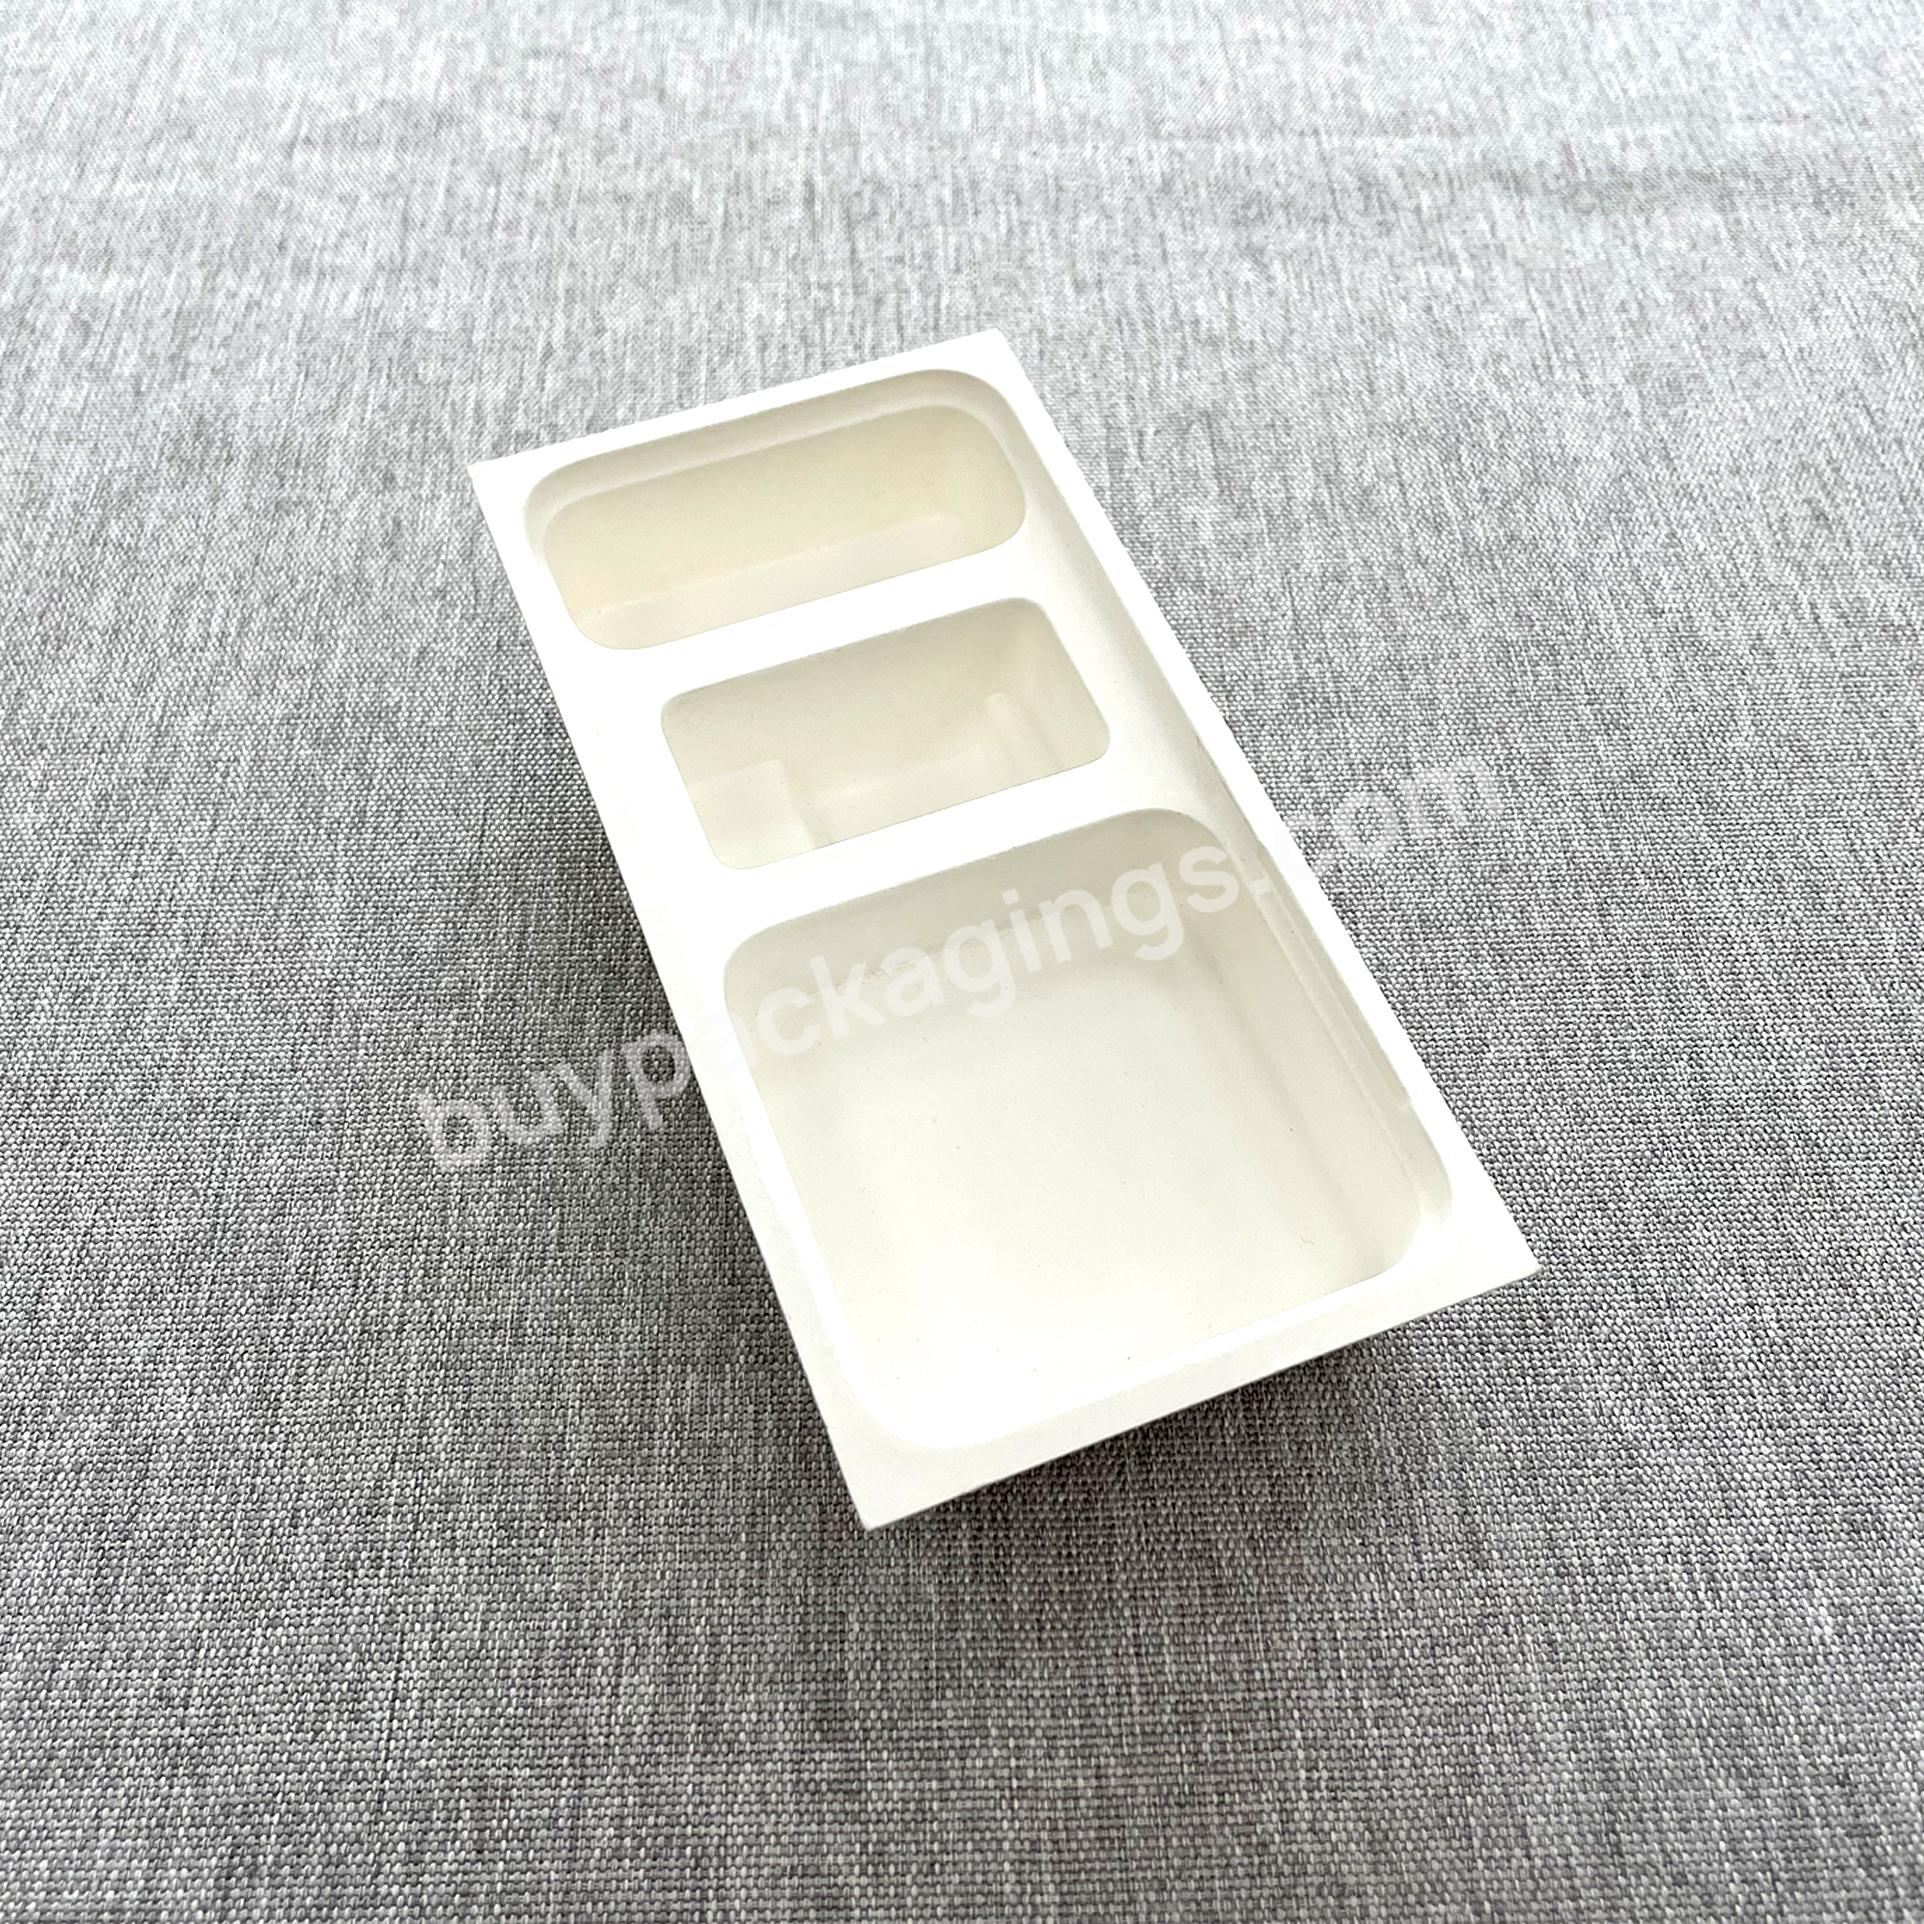 China Wholesale Custom Biodegradable Molded Pulp Electronic Equipment Usb Paper Packing Pulp Packaging Tray - Buy Biodegradable Pulp Tray,Wholesale Paper Tray,Electronic Equipment Packaging Tray.